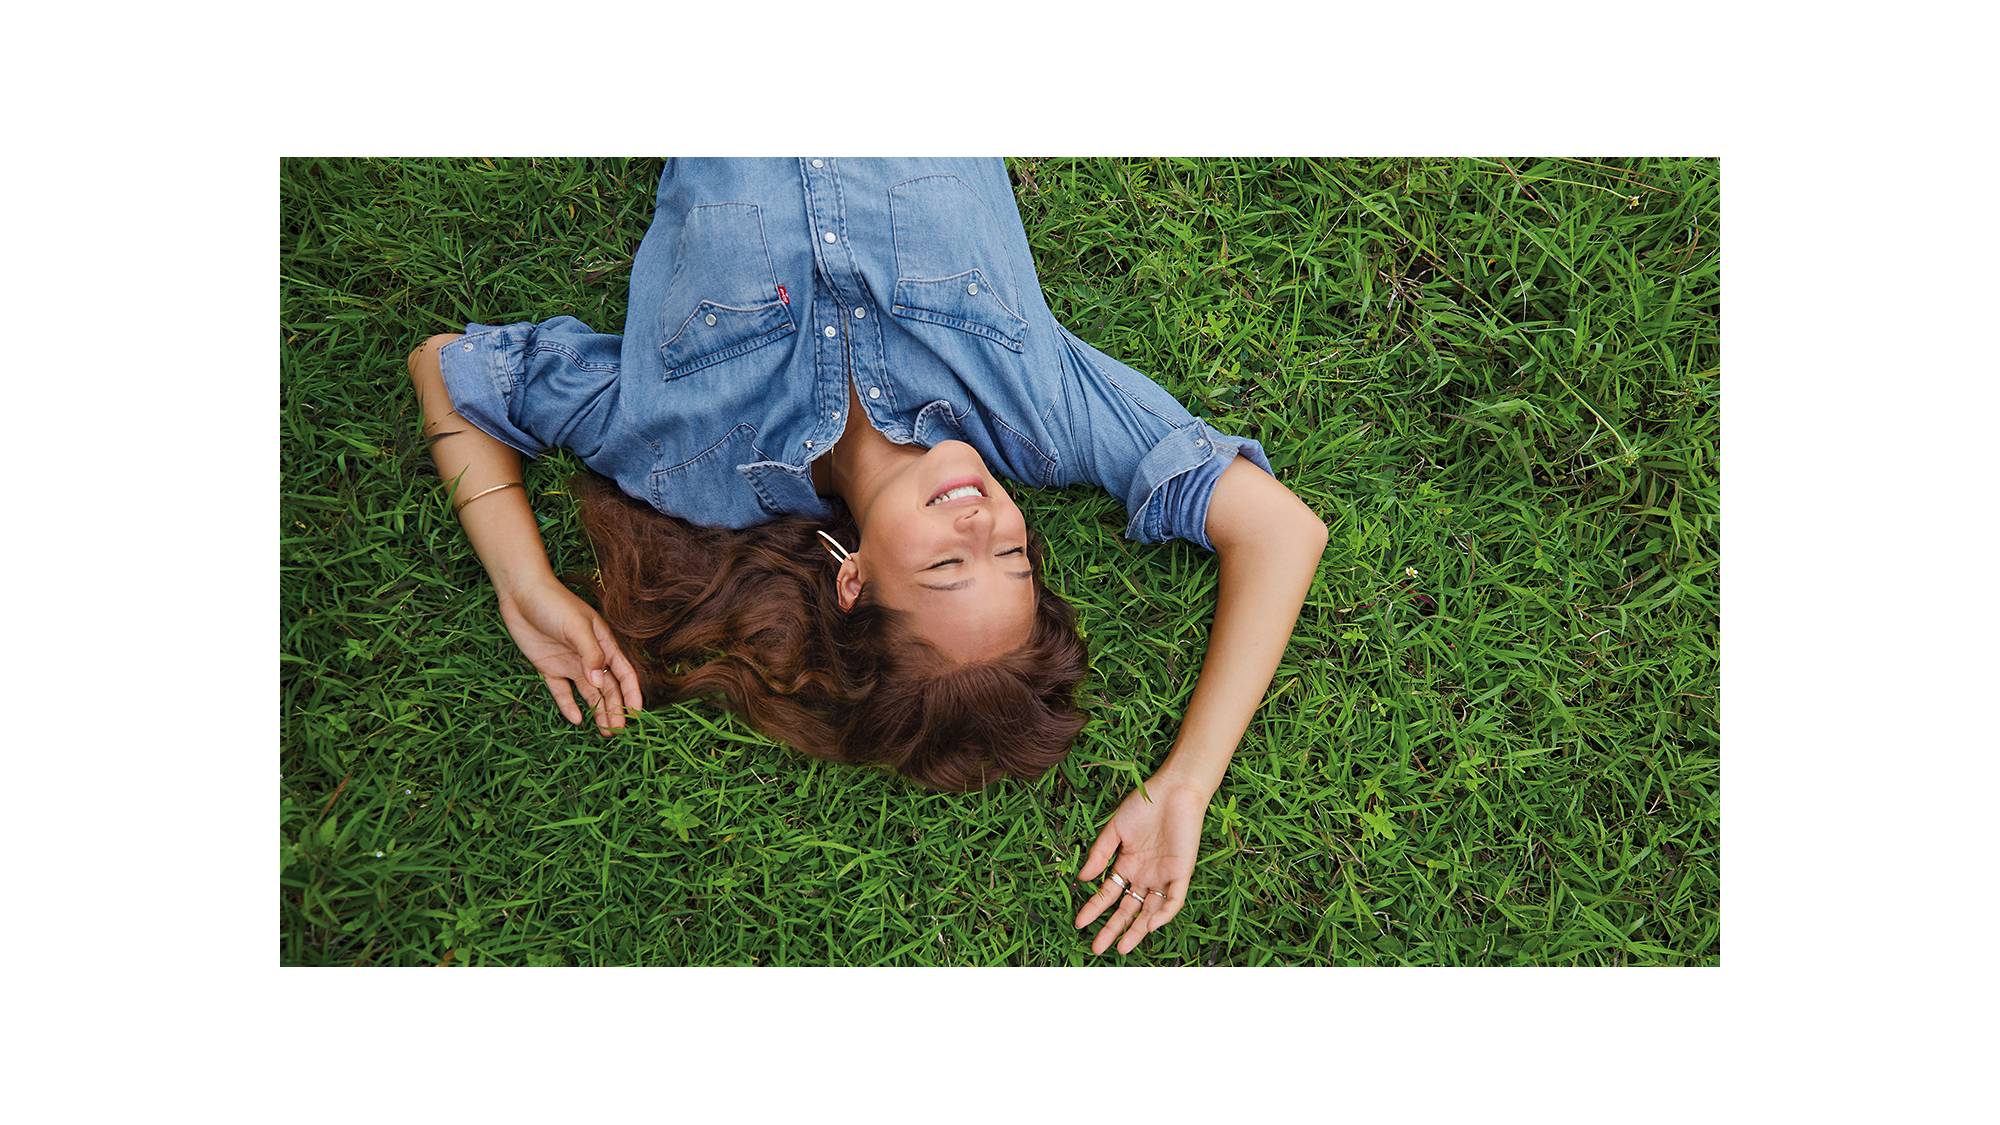 A photo of Melati wearing a Levi's button up lying on green grass smiling